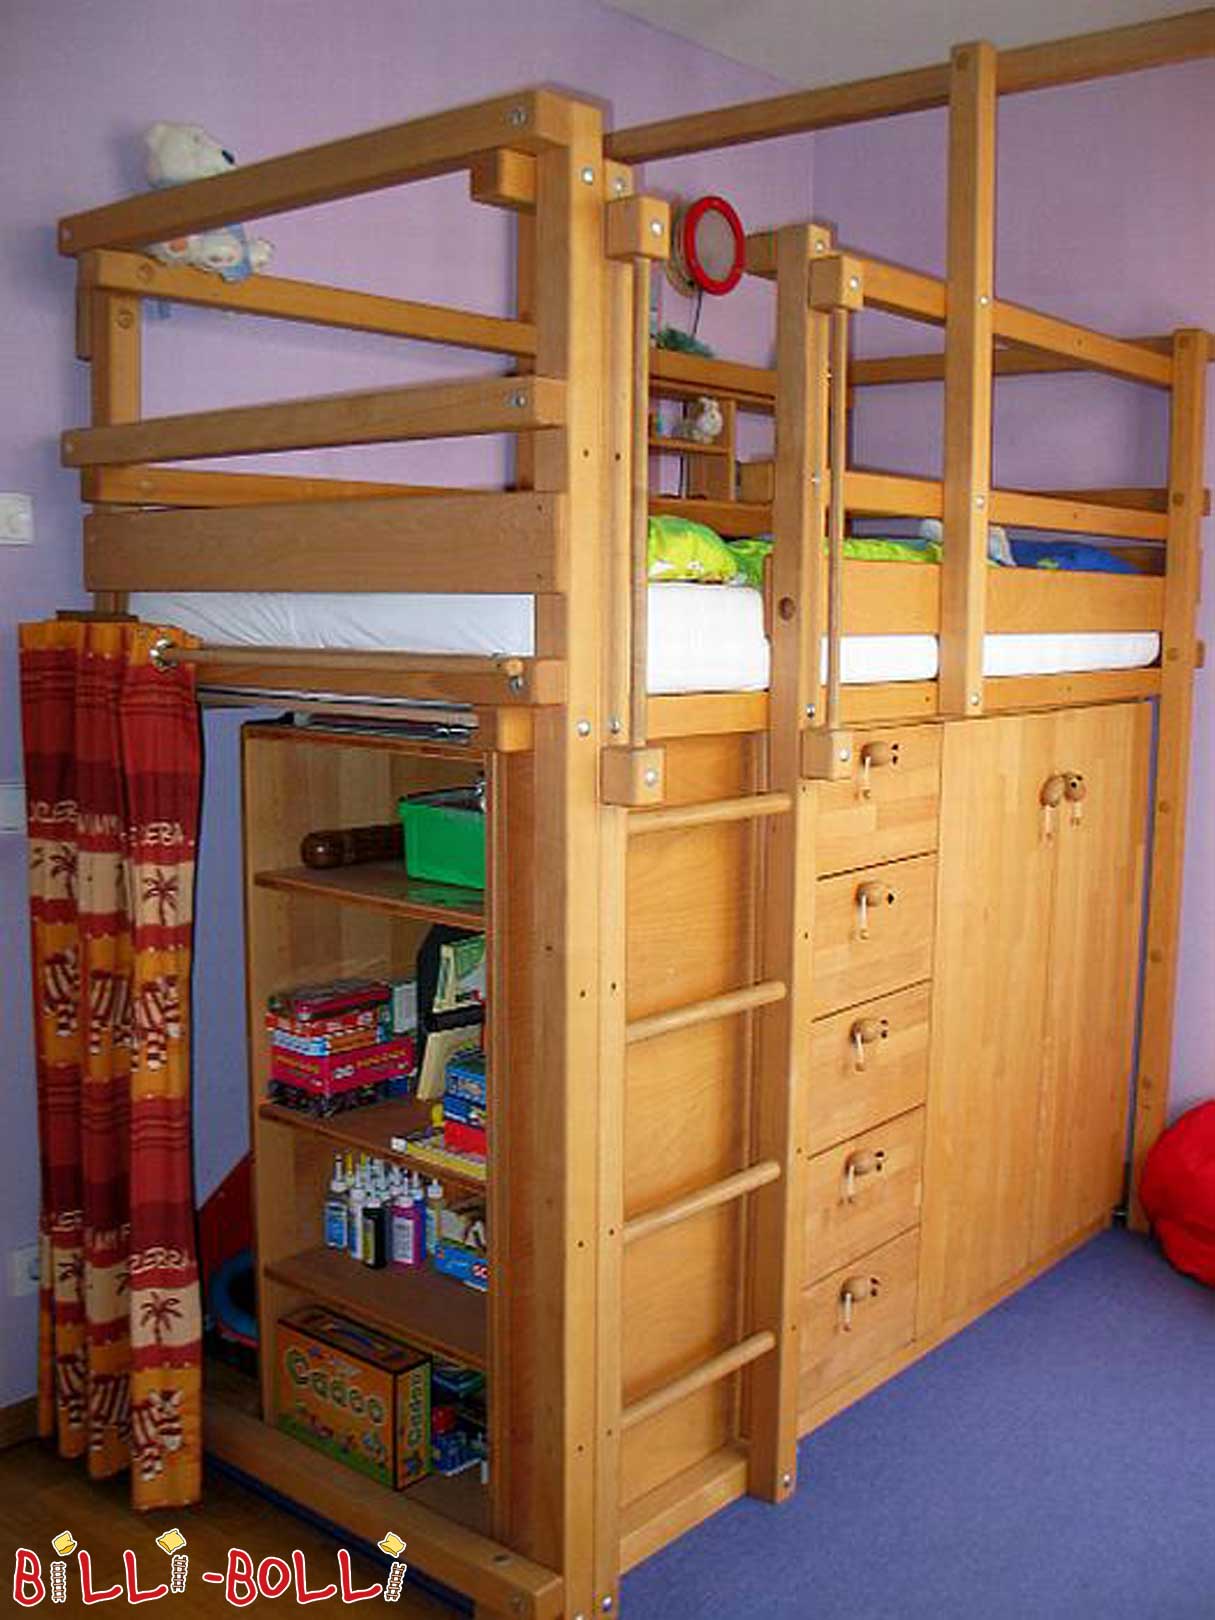 Loft bed Billi-Bolli with custom-made base cabinet and reg (Category: second hand loft bed)